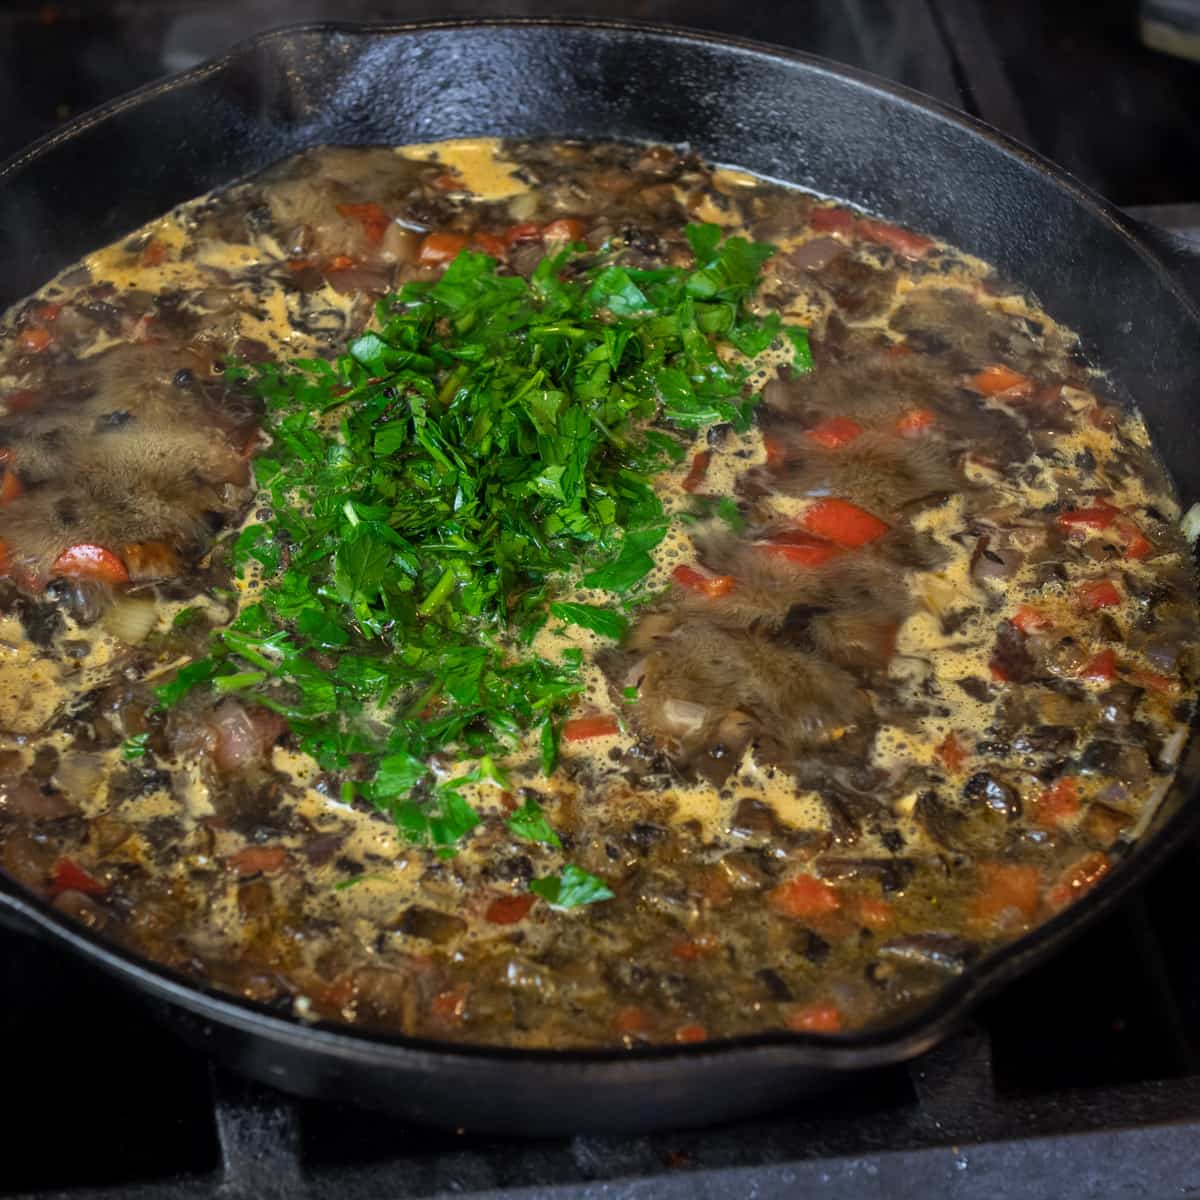 Minced parsley in a skillet with broth and other vegetables.